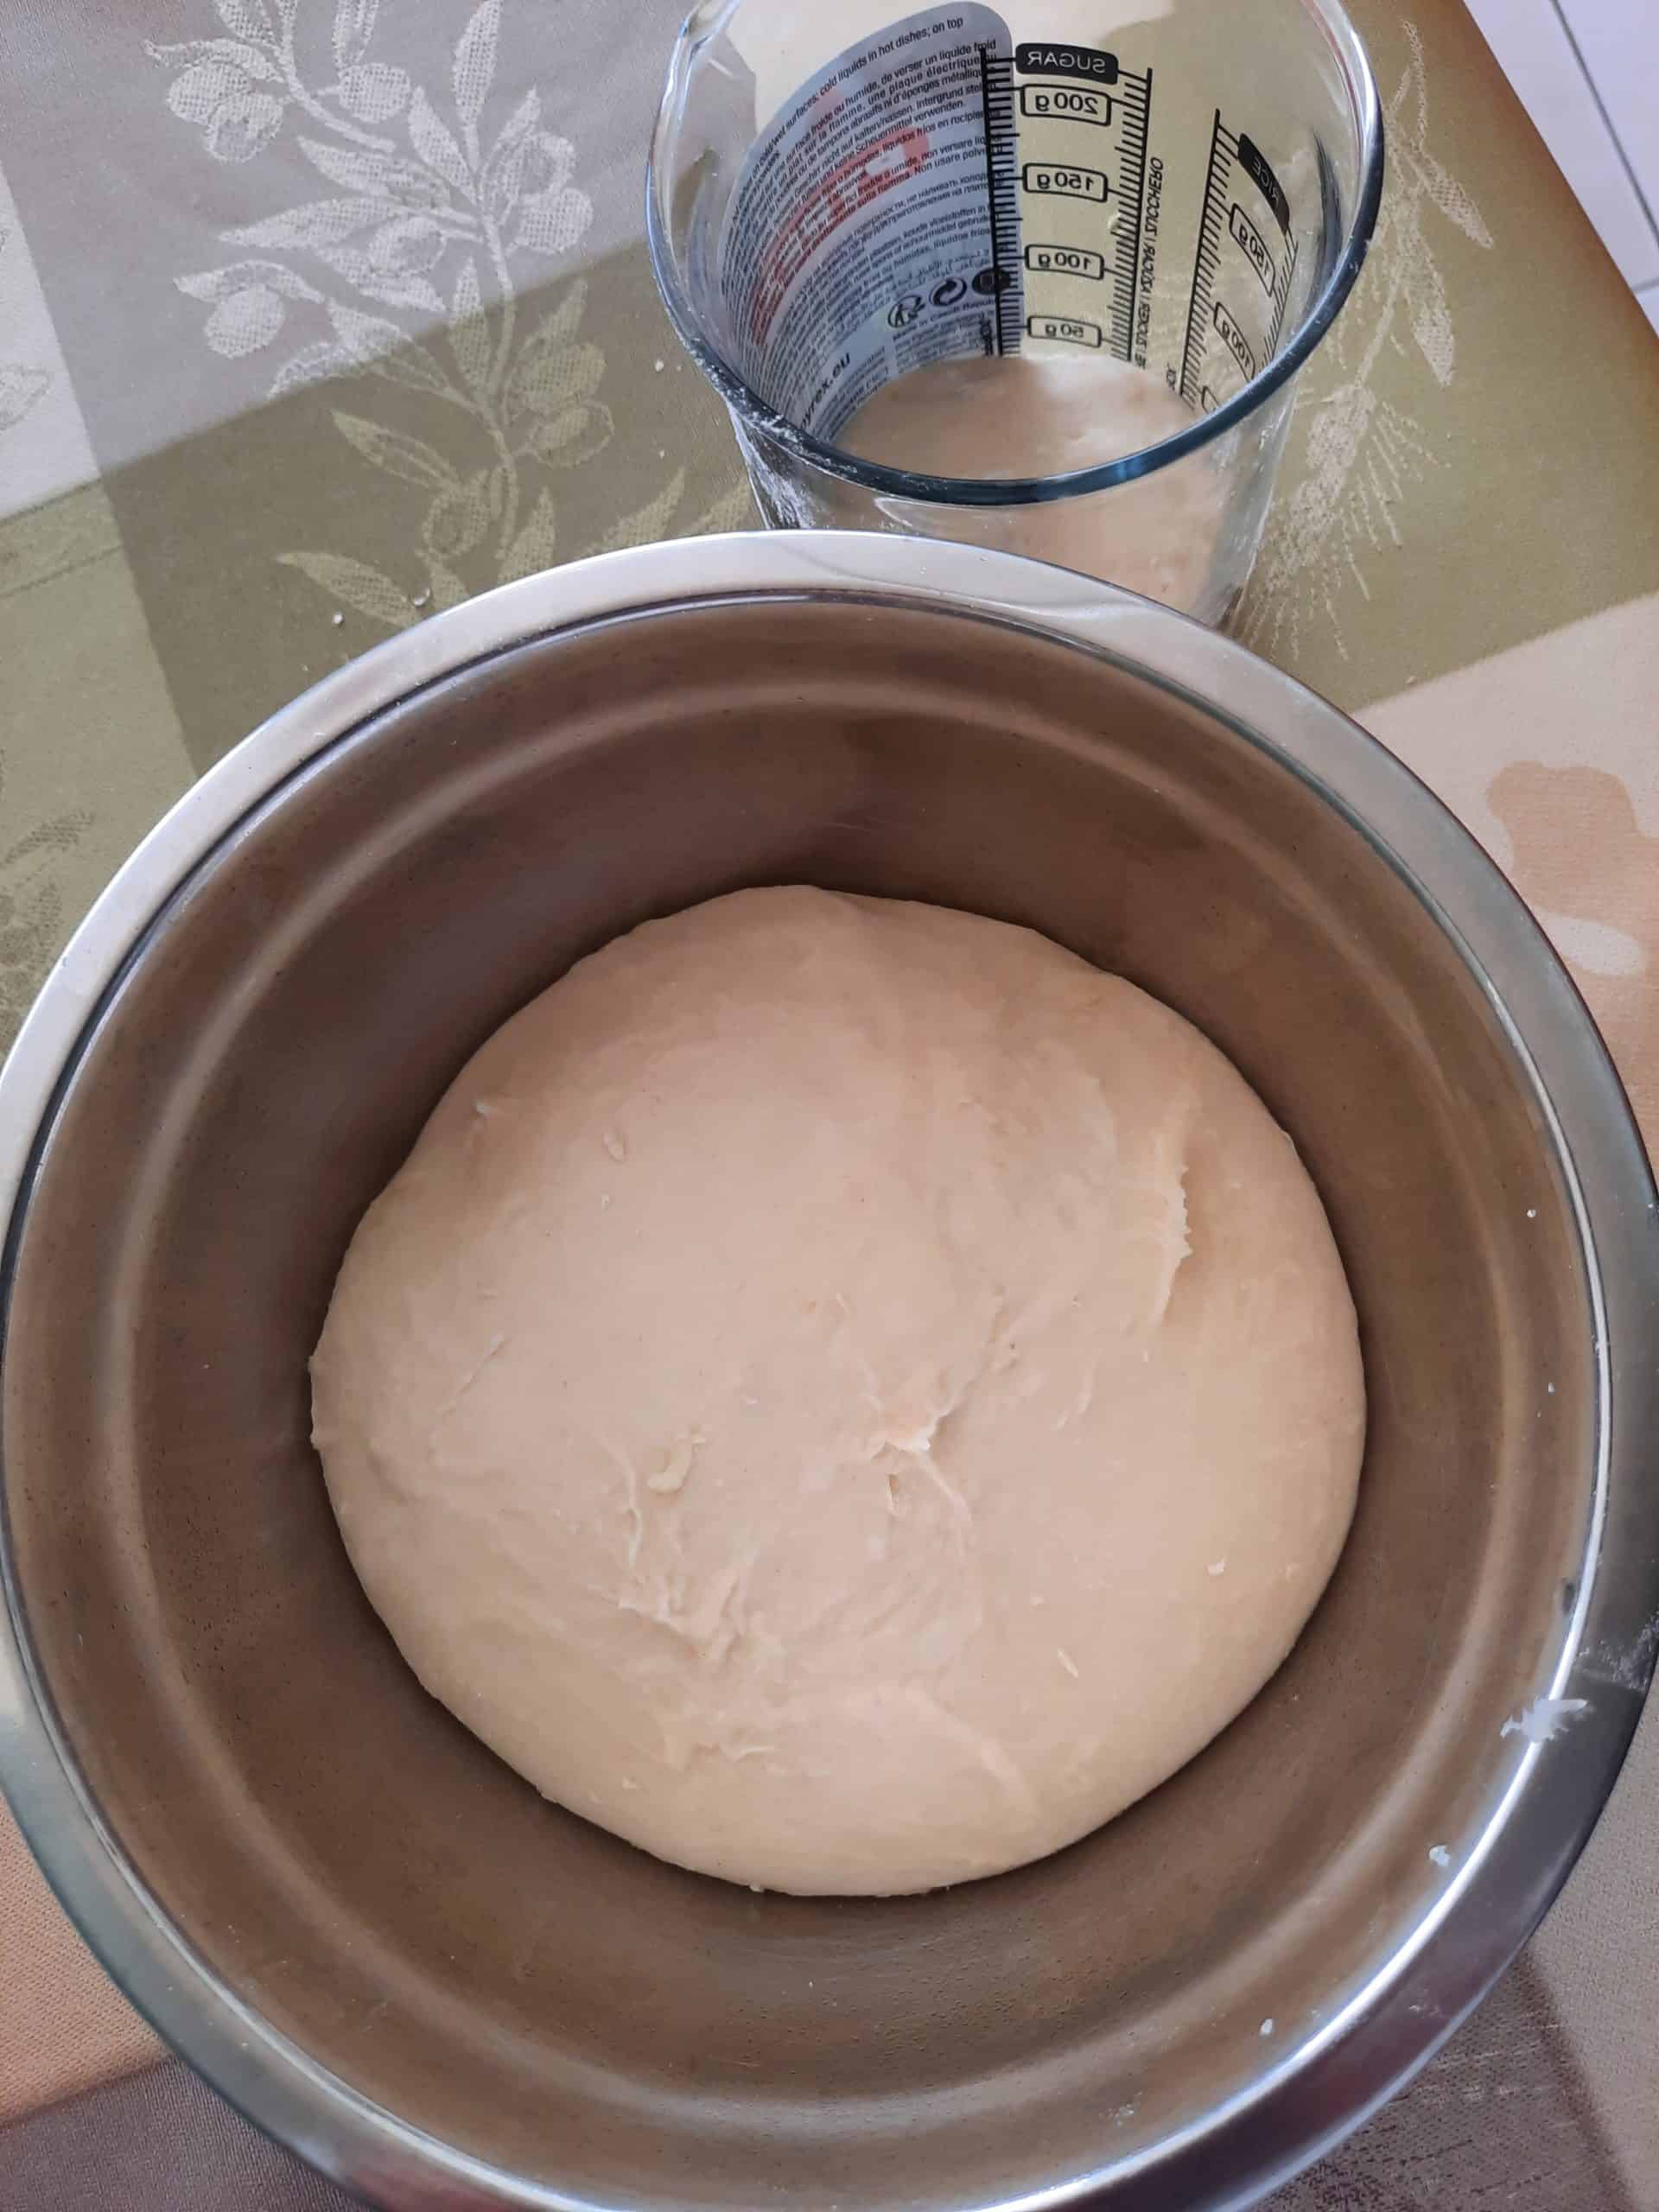 Let the dough rest at room temperature and the base rises until doubled in size (about 60 minutes).